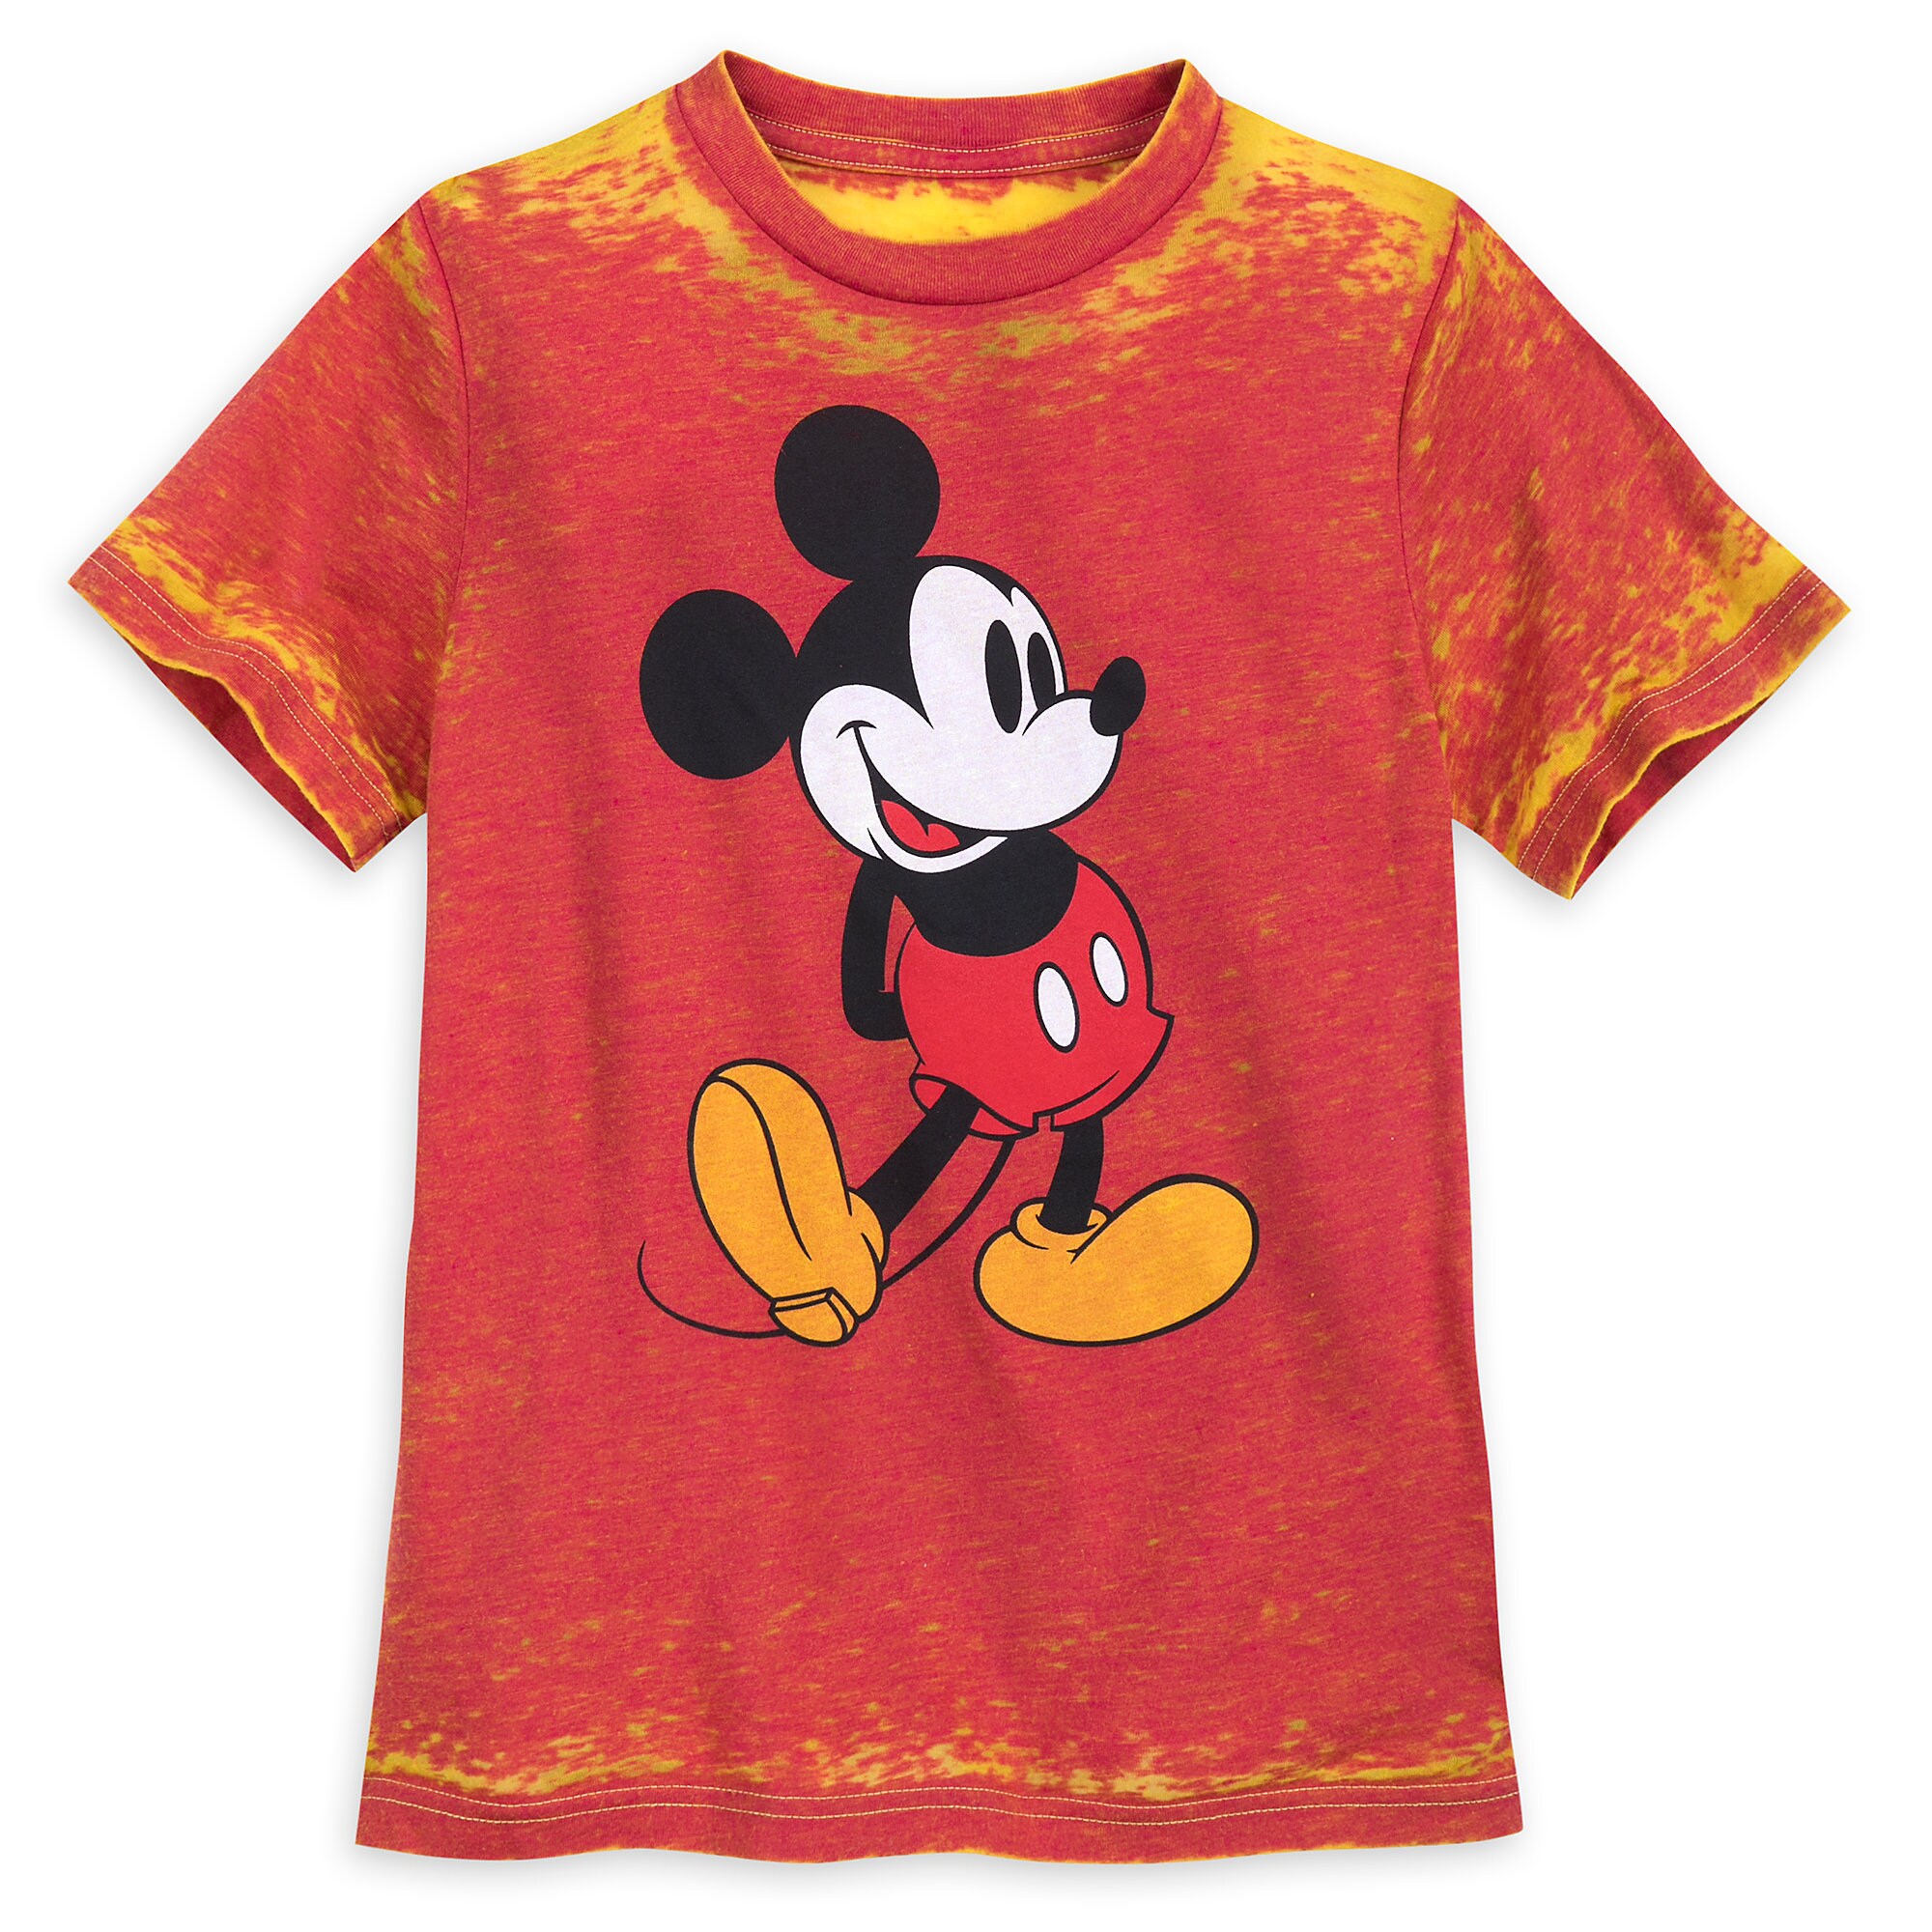 Mickey Mouse Burnout T-Shirt for Kids